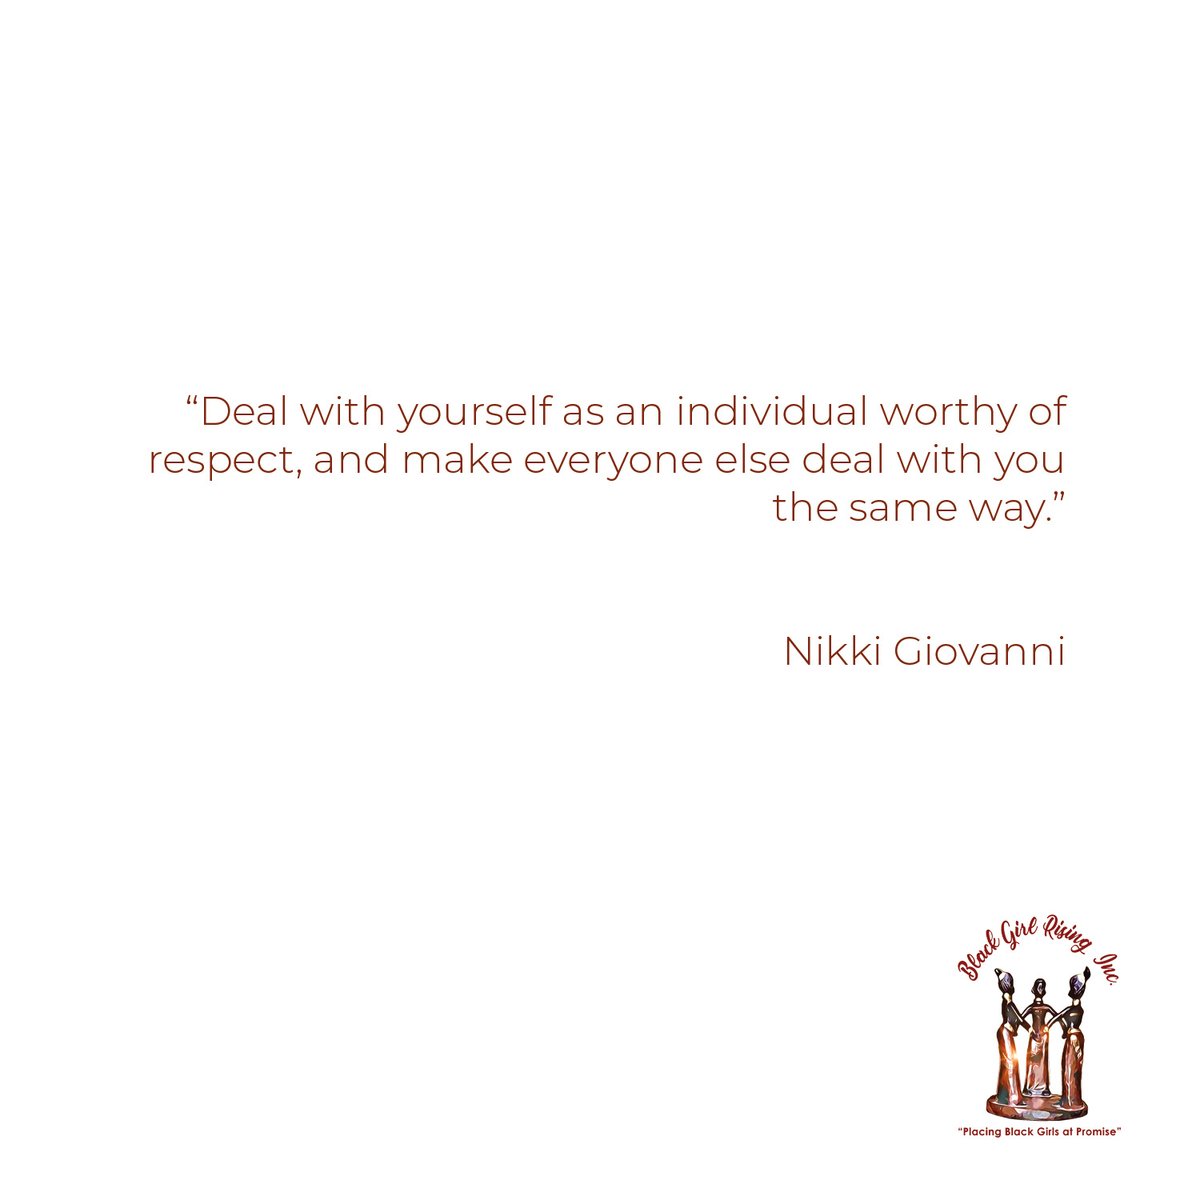 “Deal with yourself as an individual worthy of respect, and make everyone else deal with you the same way.” – #NikkiGiovanni

#BGR #atpromise #blackgirlmagic #blackexcellence #womenempowerment #love